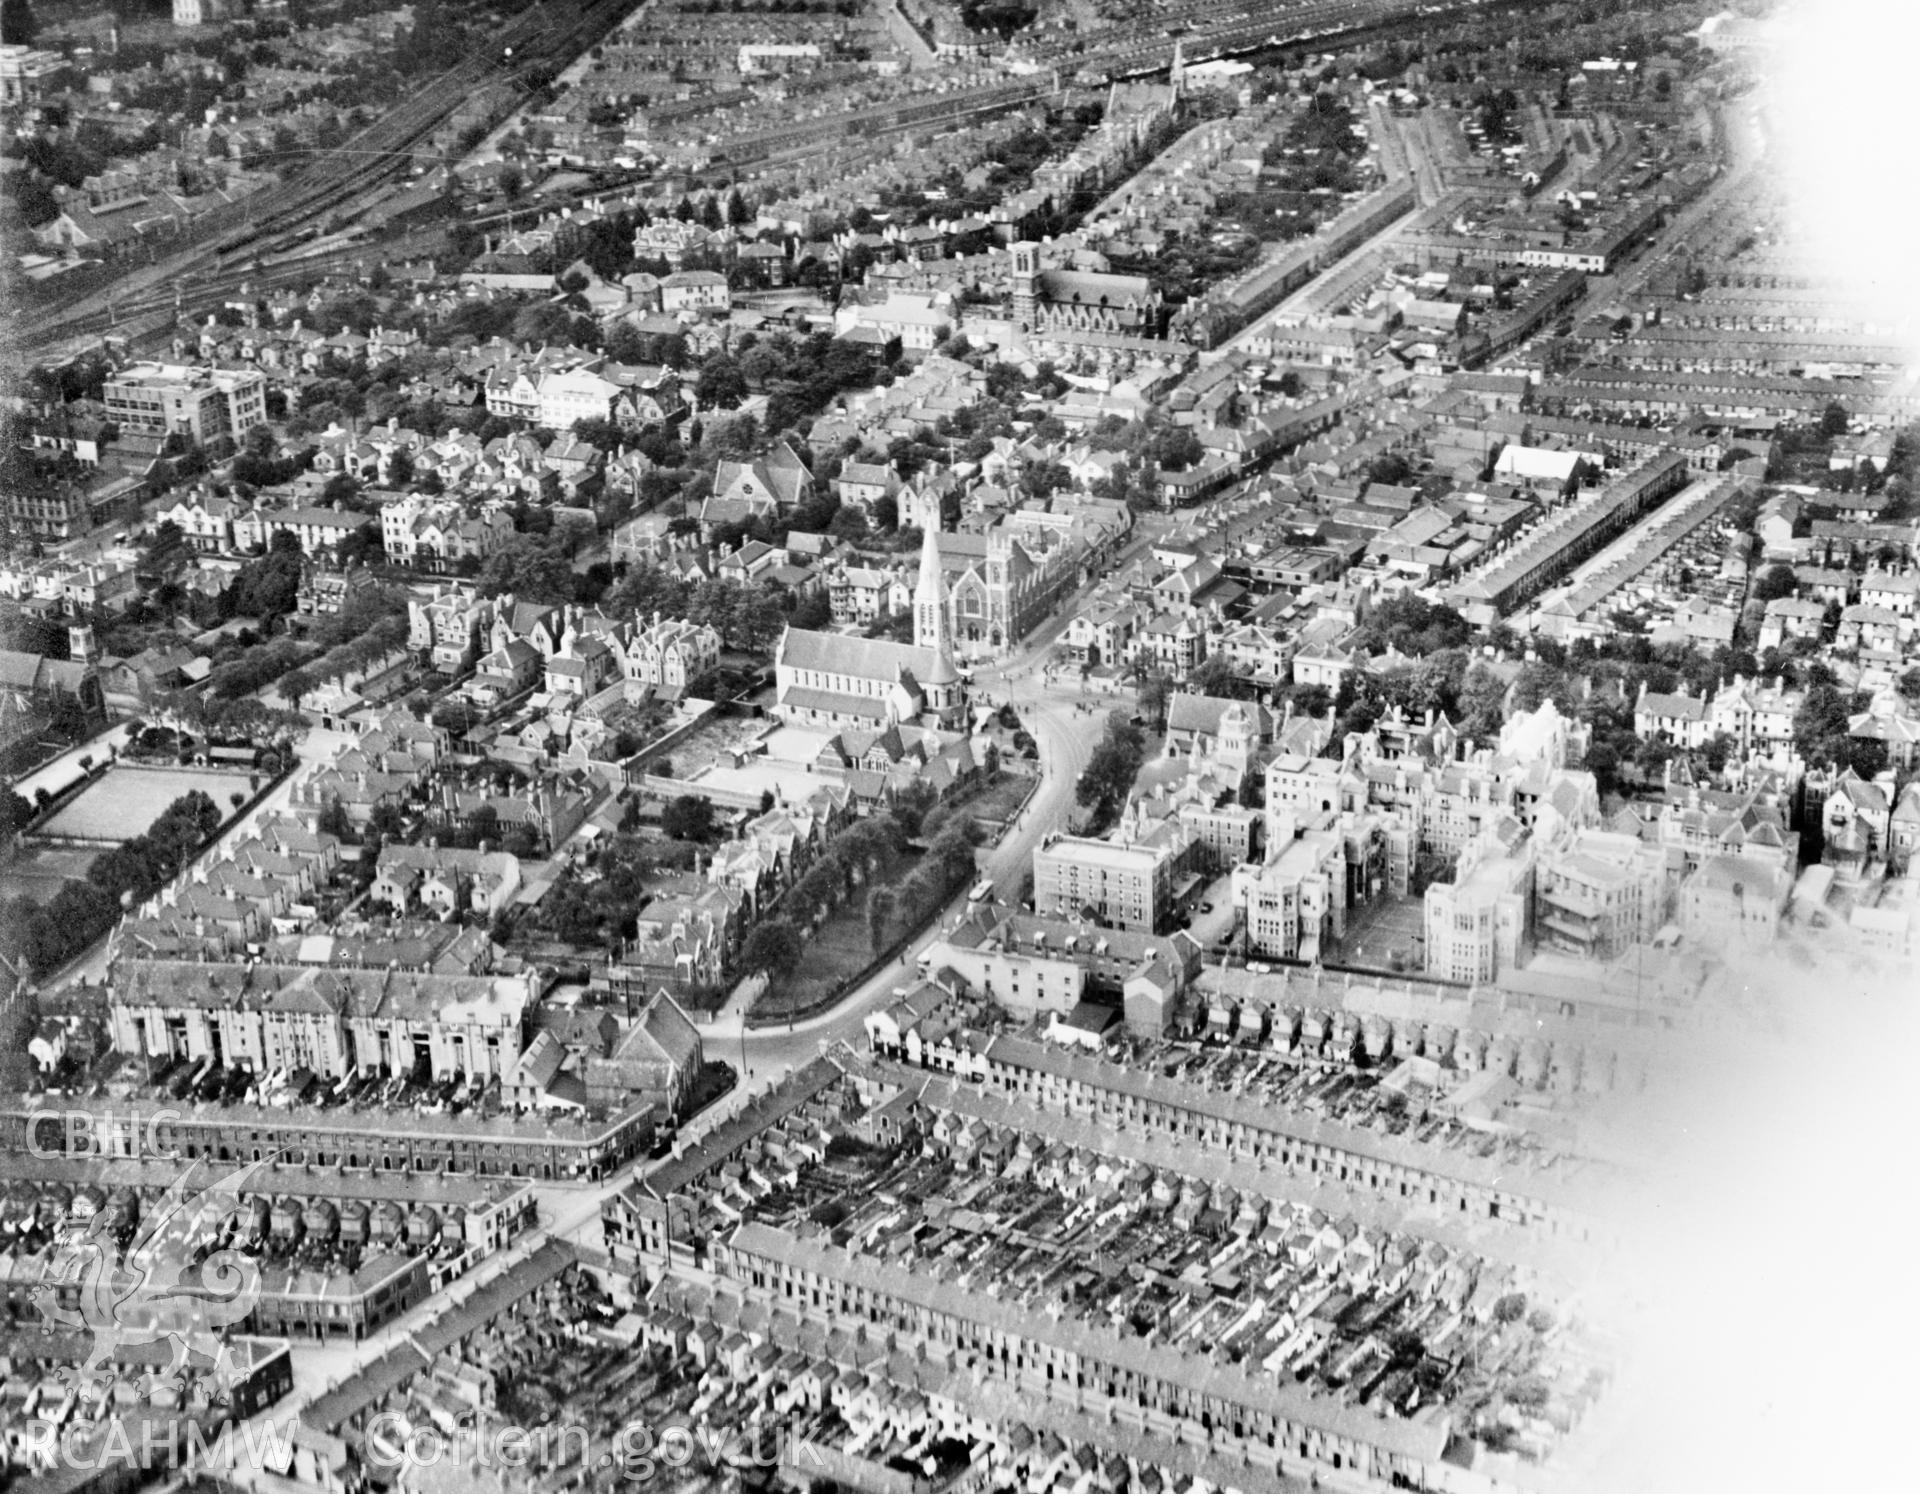 View of Adamstown area of Cardiff showing St James's church and the Royal Infirmary. Oblique aerial photograph, 5?x4? BW glass plate.